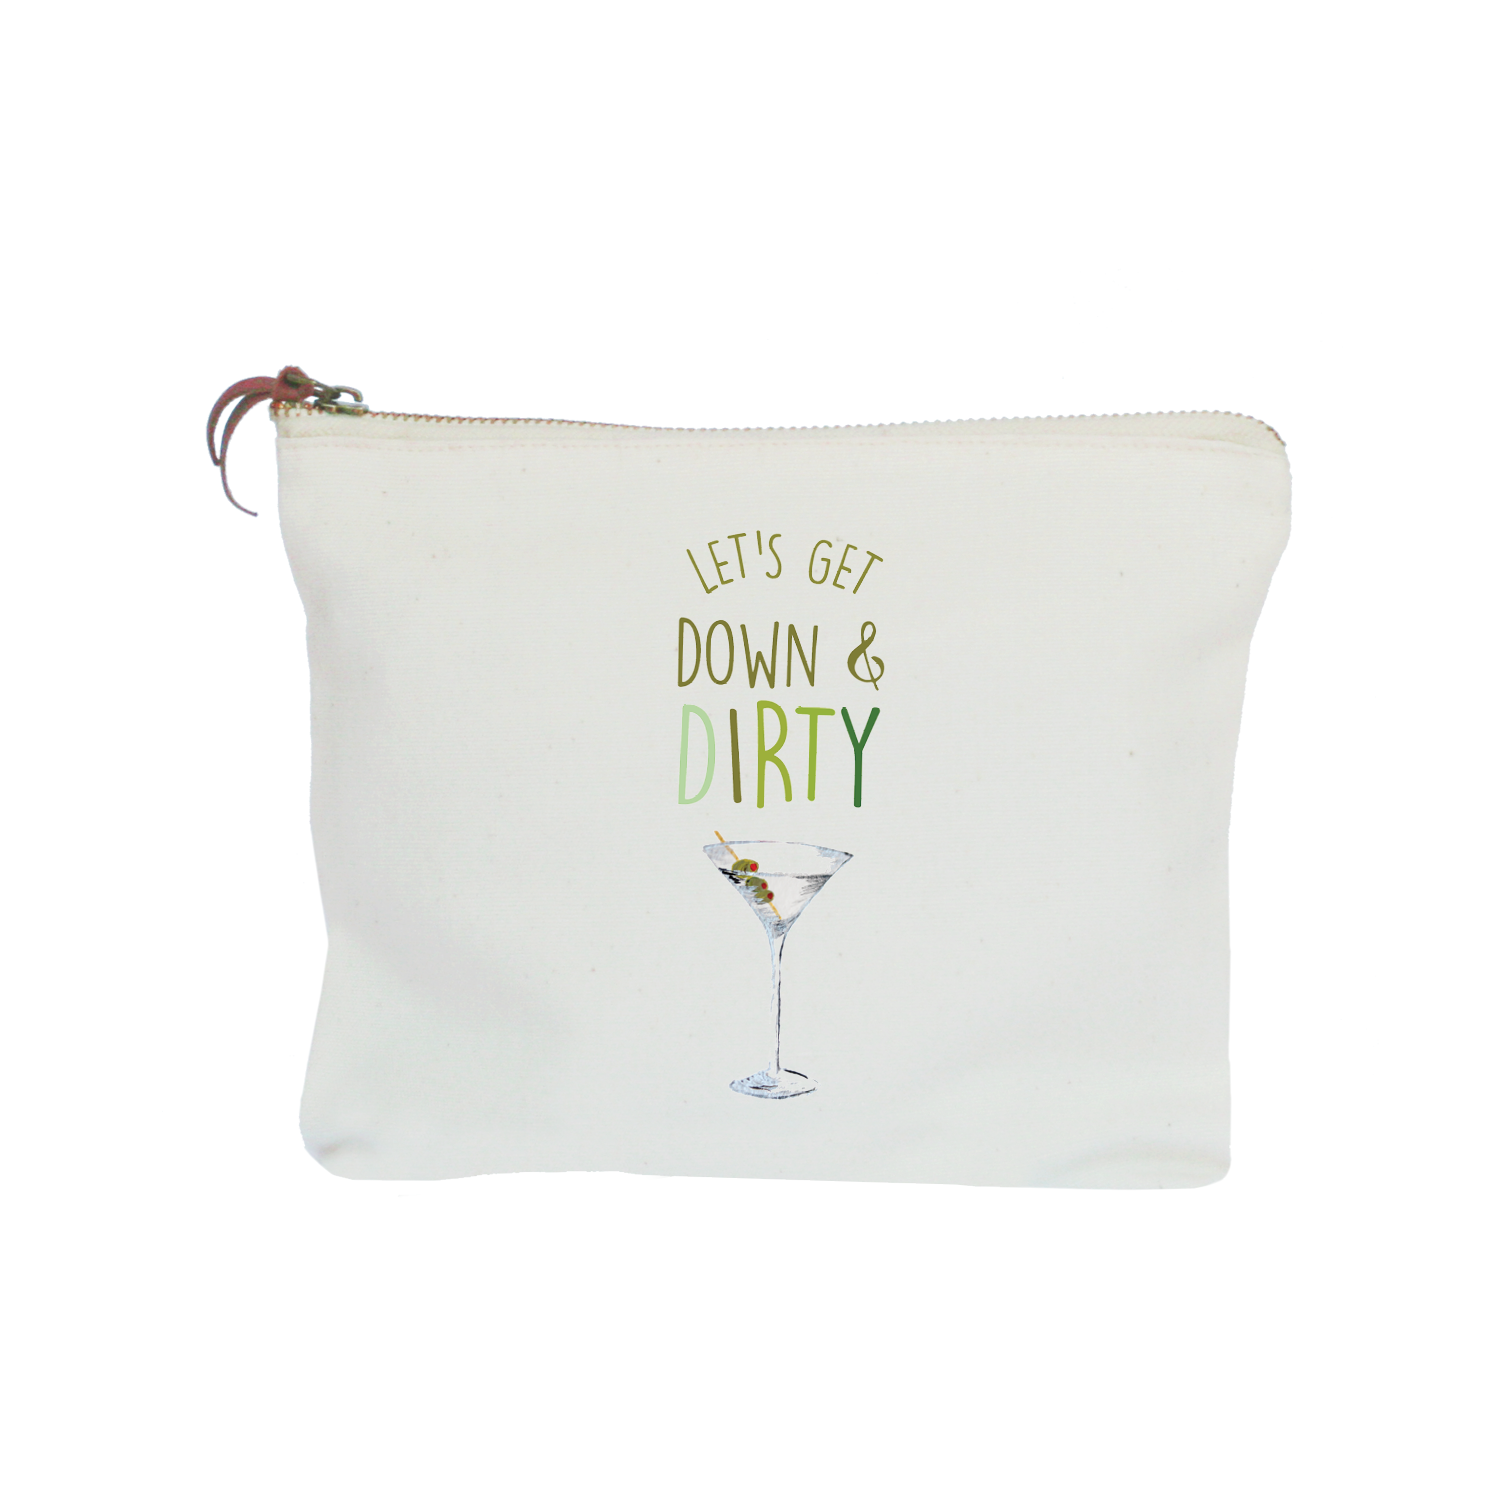 down and dirty zipper pouch